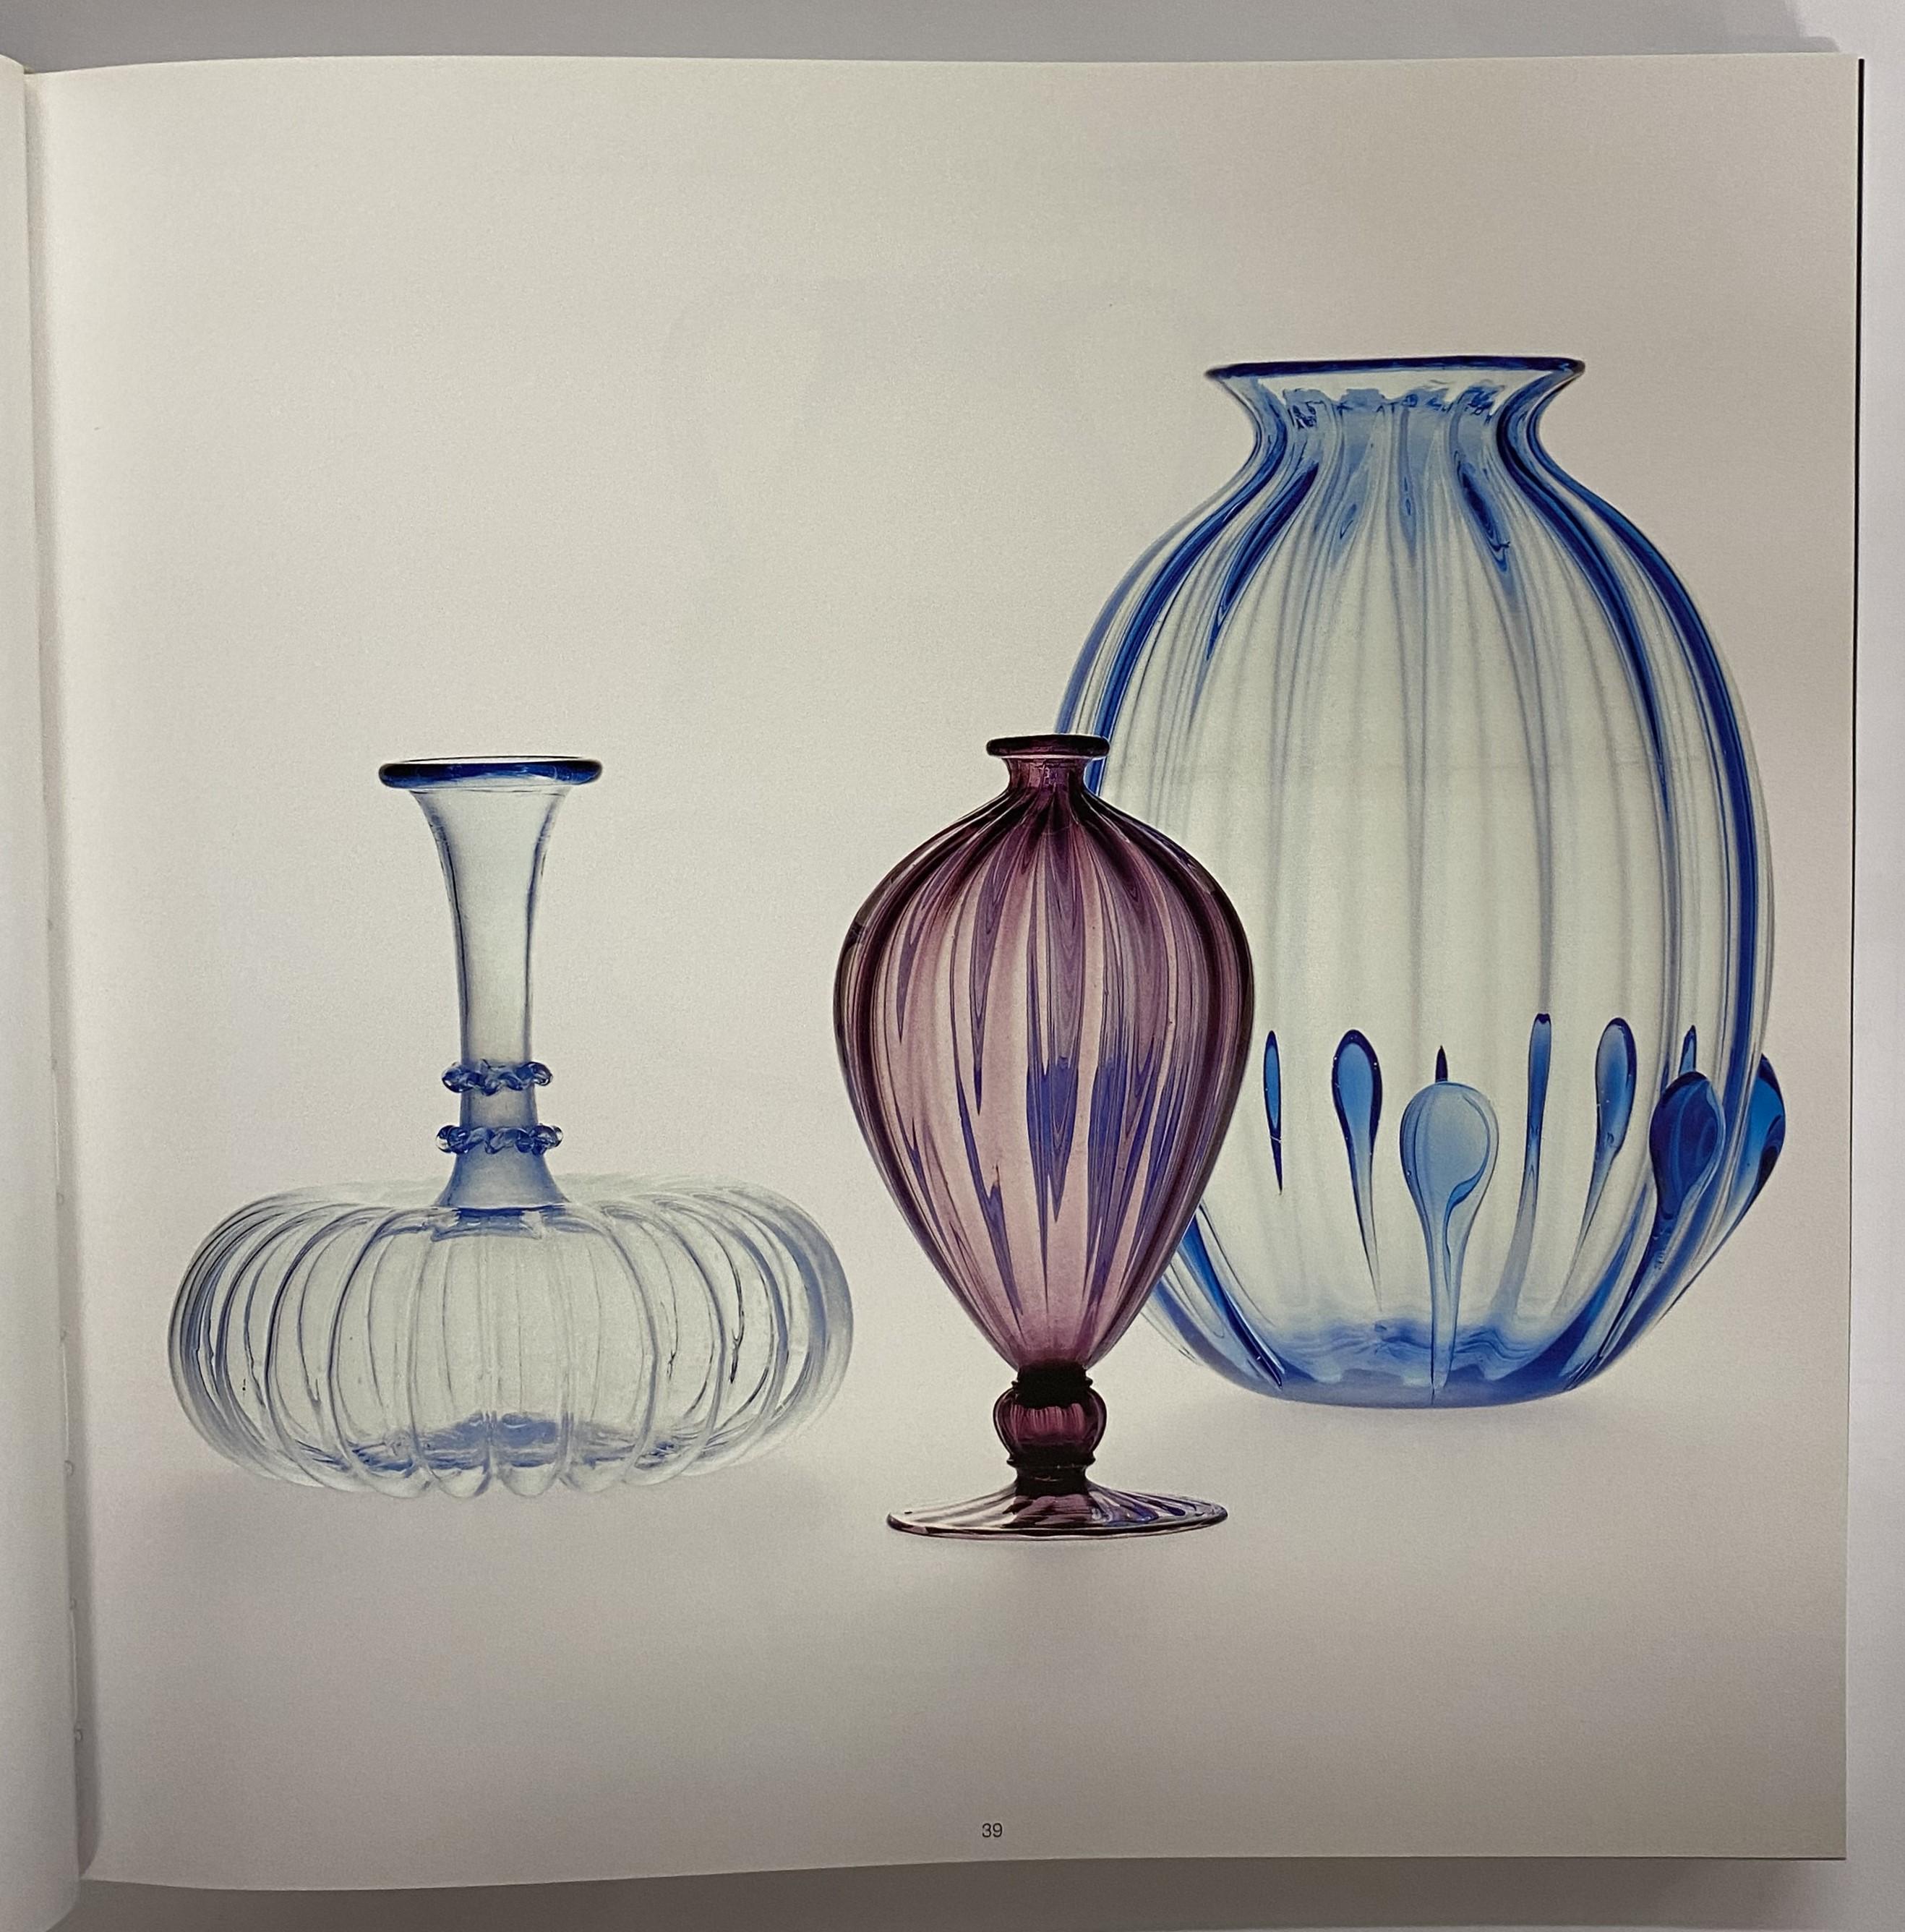 A rare journey into the art of fire through more than 250 magnificent pieces of art glass, which have been taken from the extraordinary 20th century Murano glass collection that Nancy Olnick and Giorgio Spanu have assembled over years of passionate